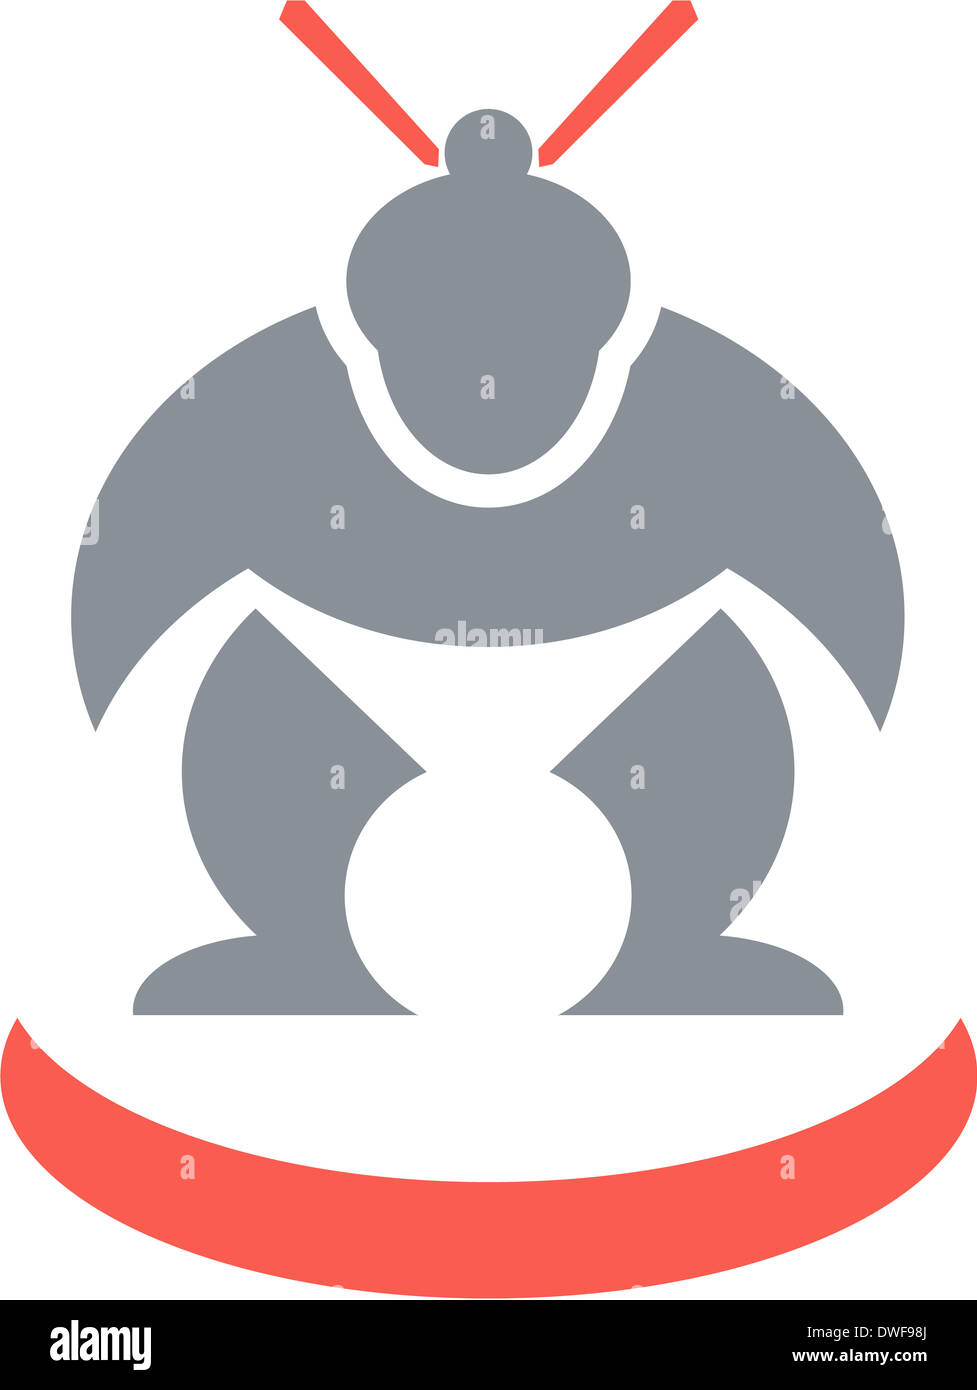 illustration of a Japanese sumo wrestler facing front isolated on white background. Stock Photo